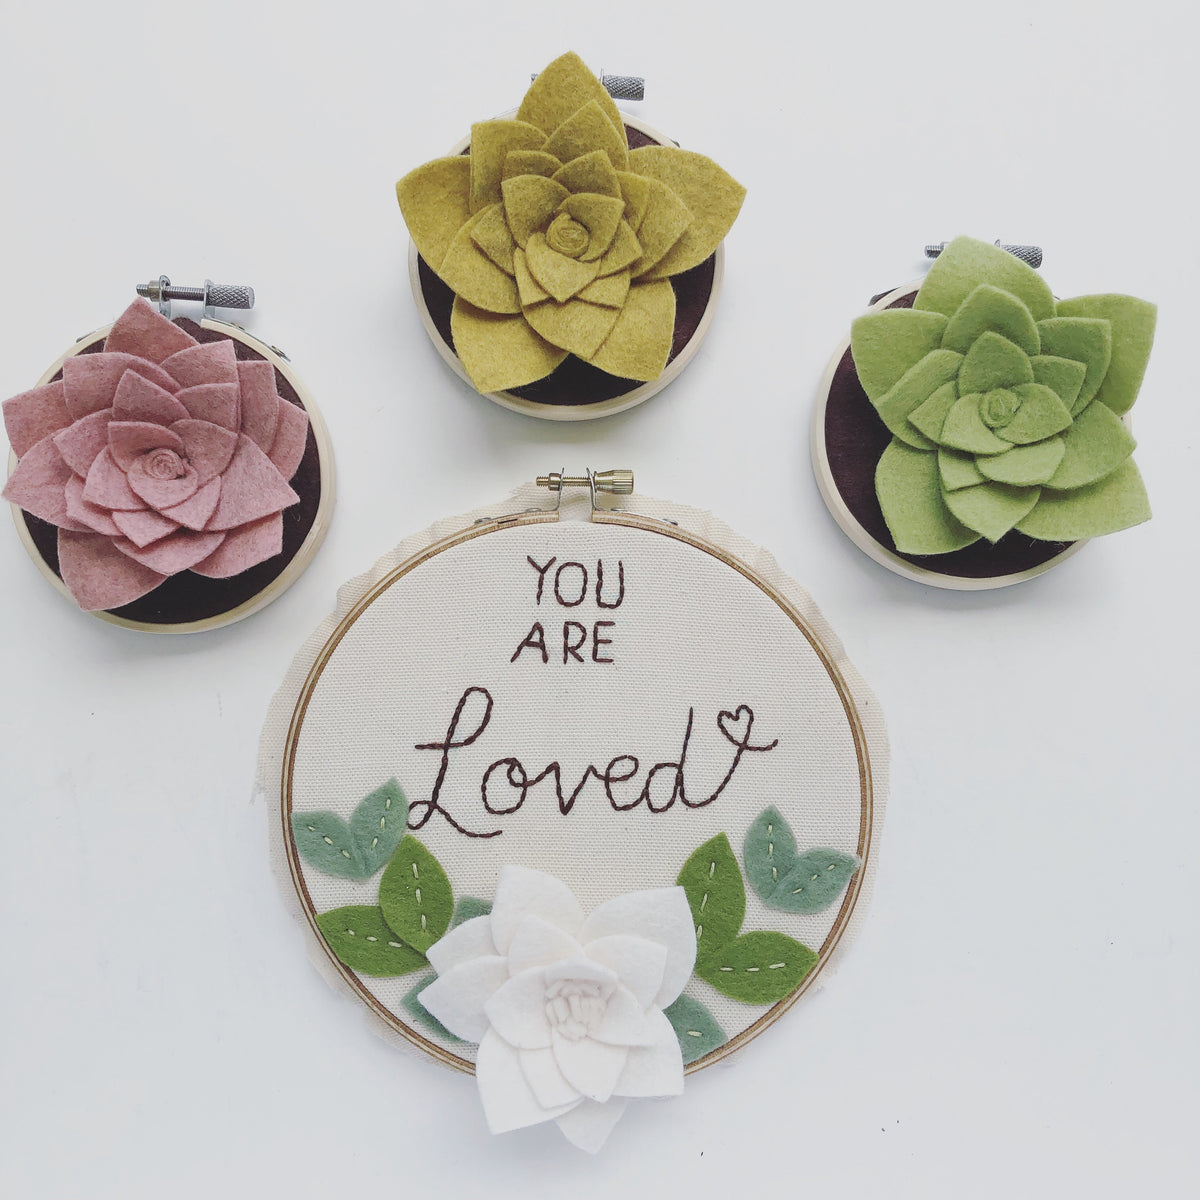 You Are Loved Embroidery Hoop Art - 4 inch – Catshy Crafts